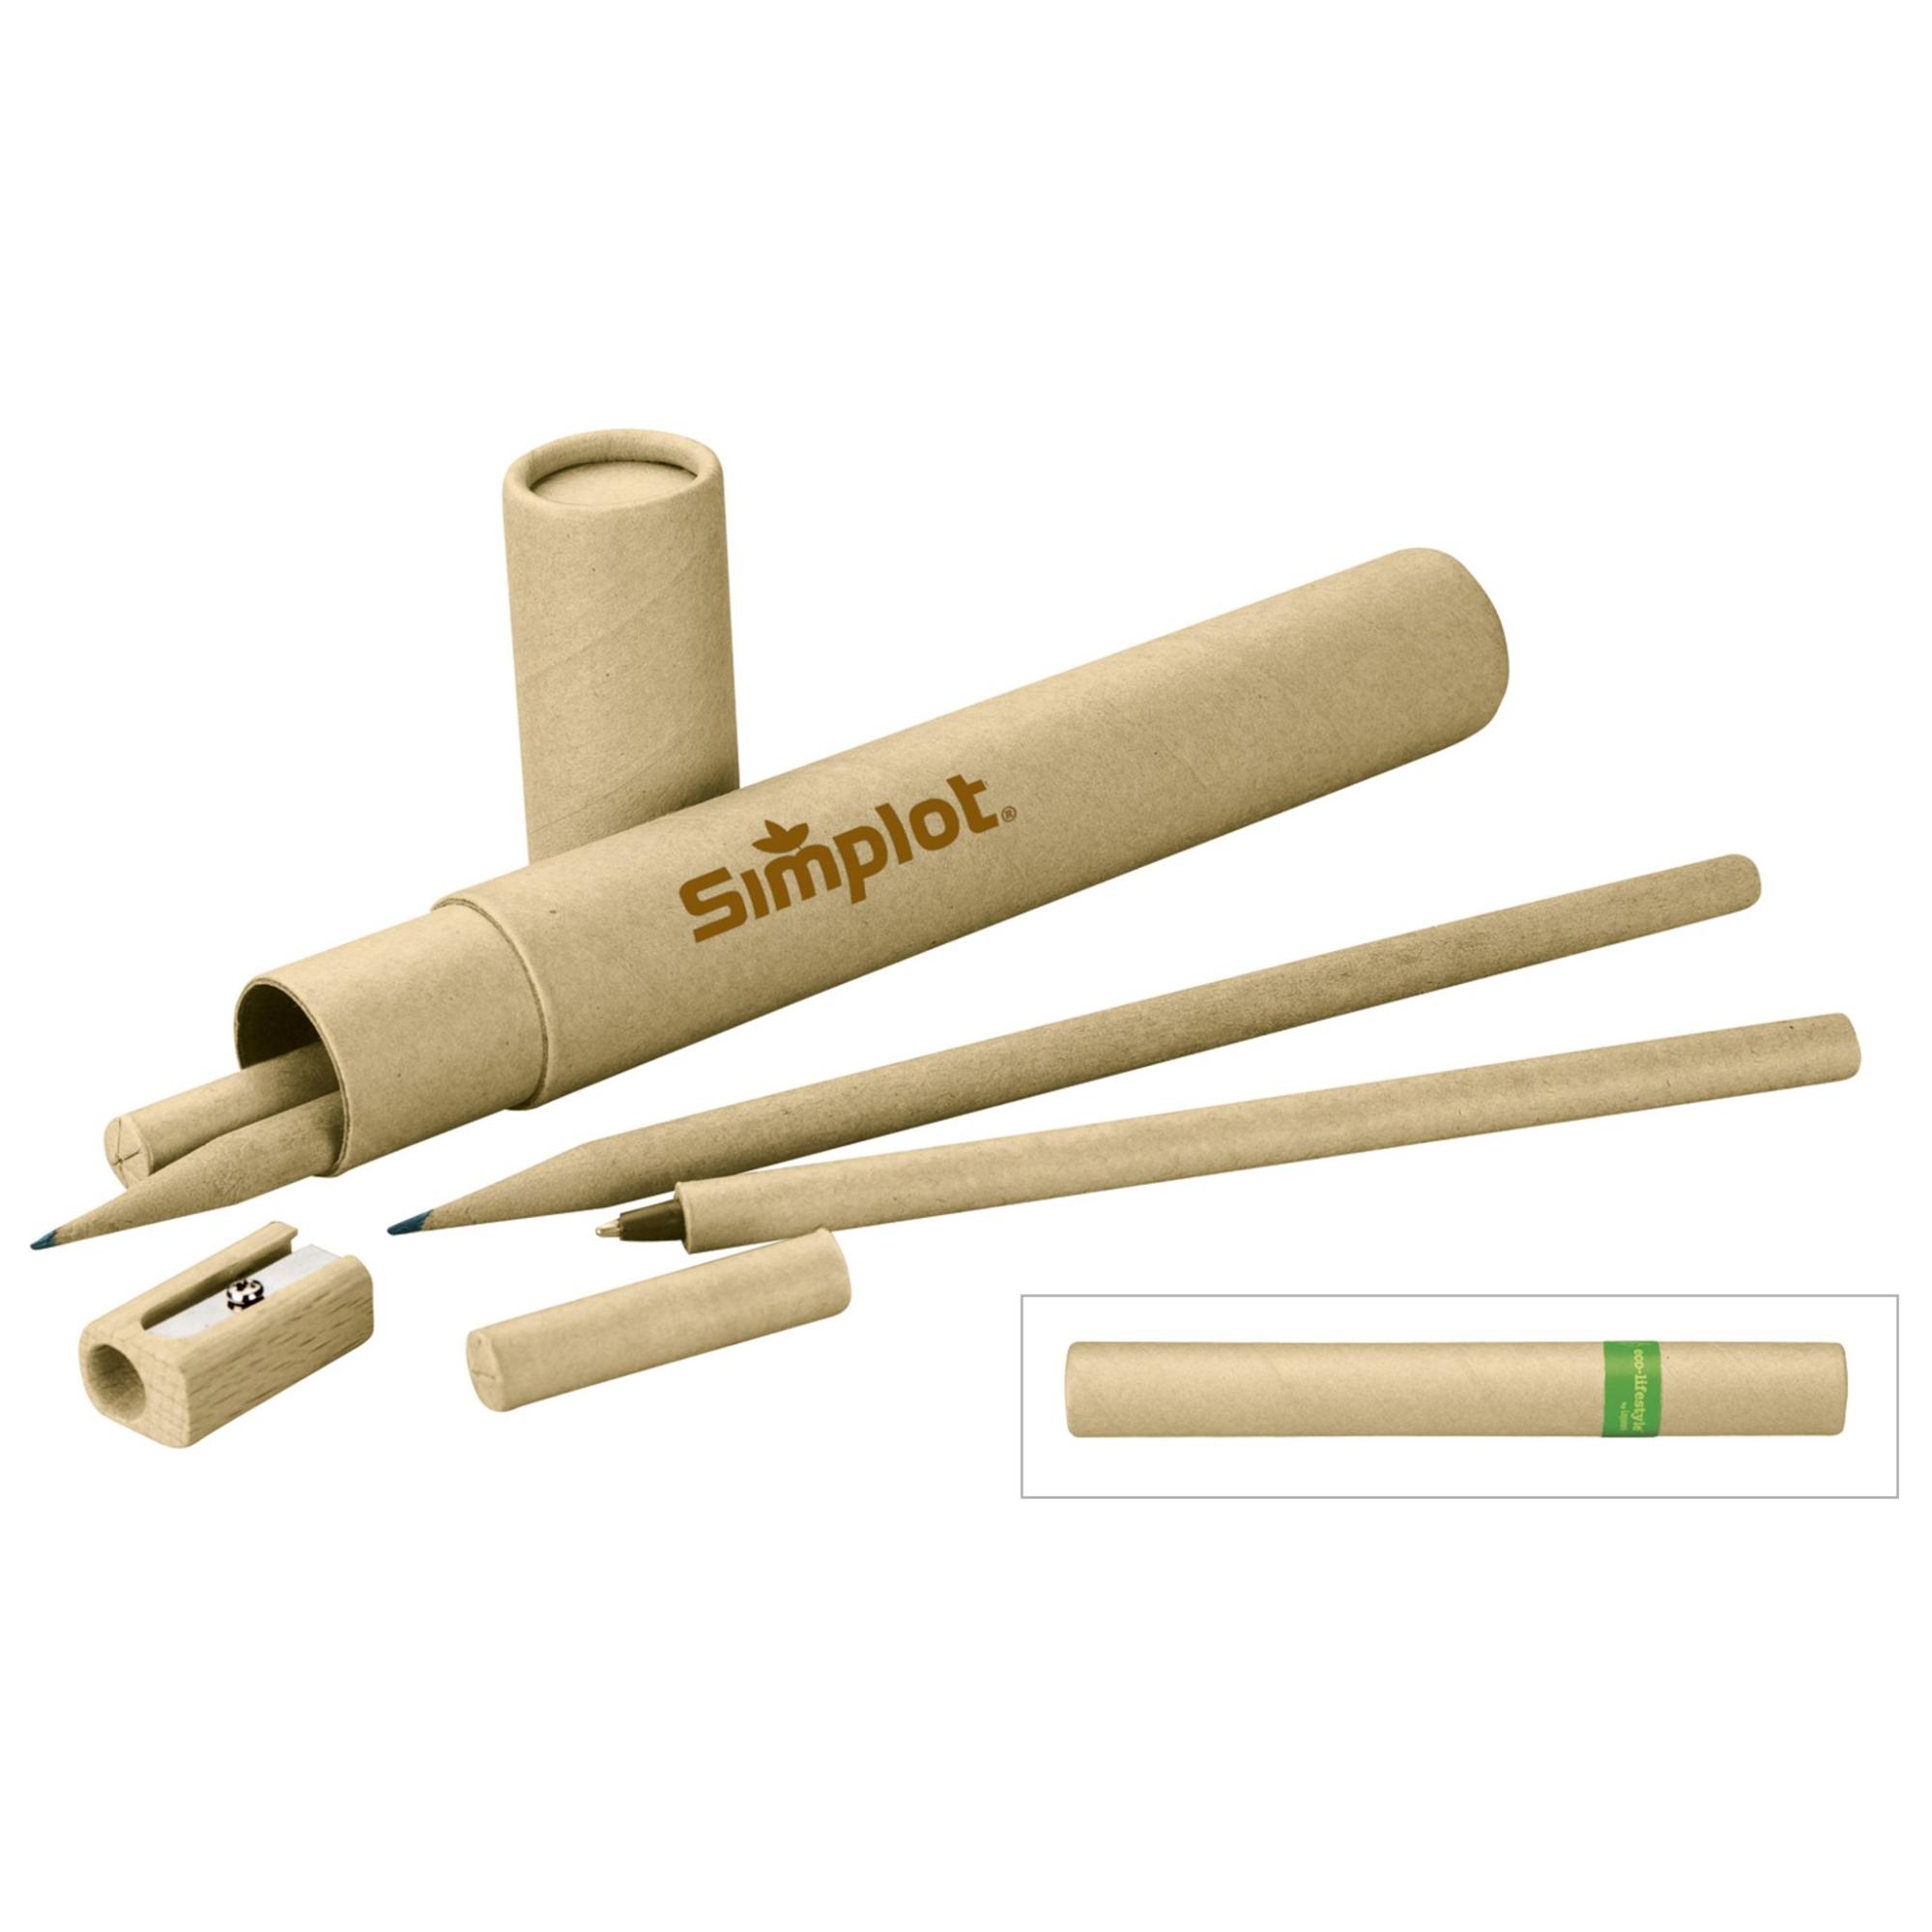 bamboo pen and pencil set with customizable engraving